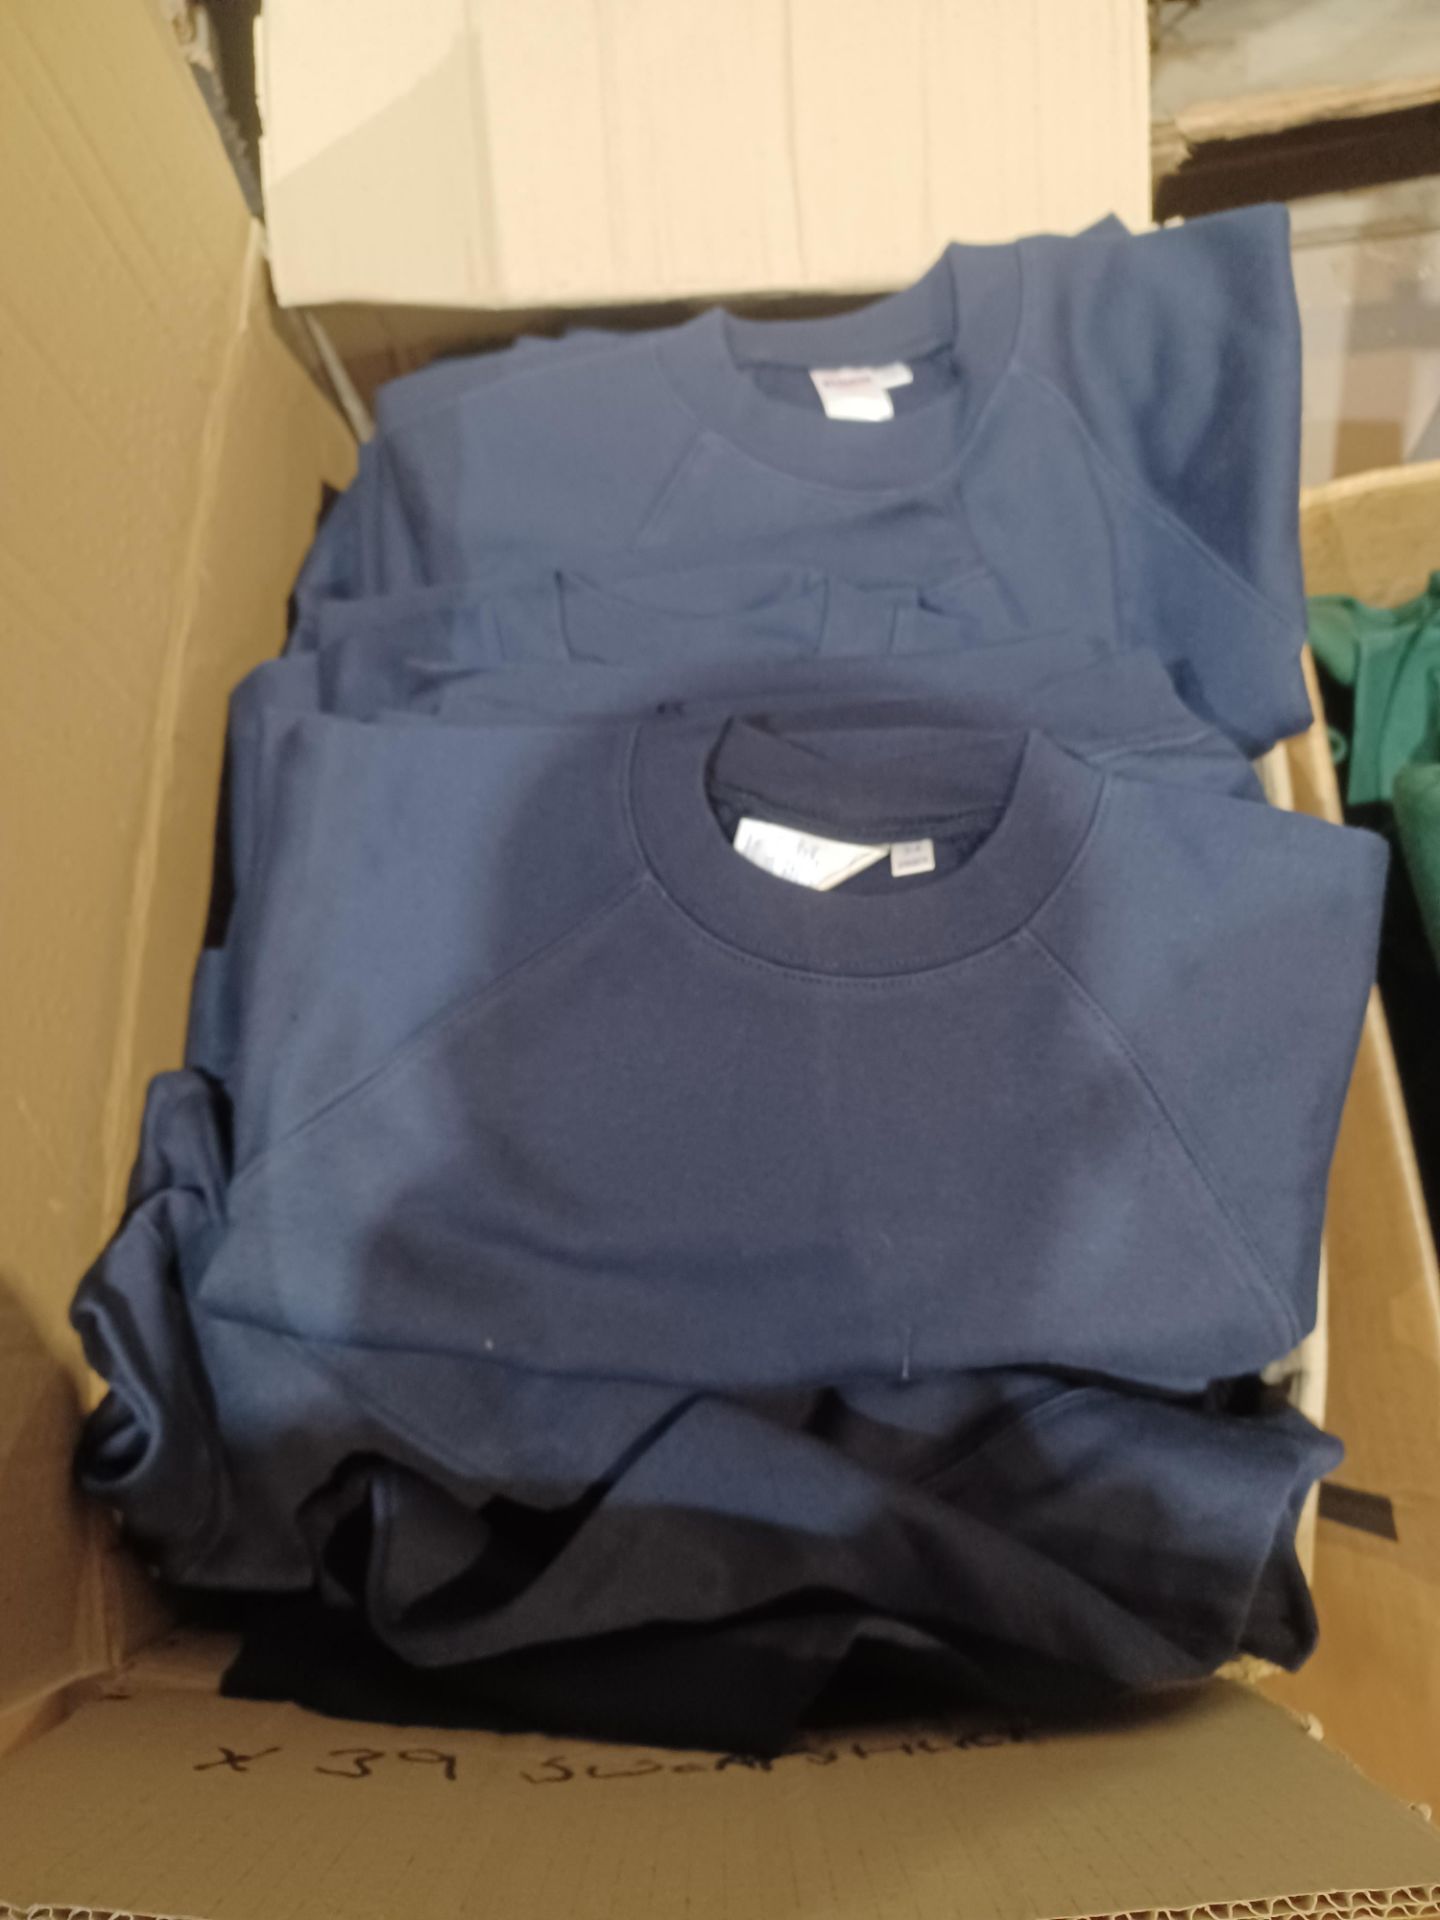 39 x Soft Cotton Fleeced Premium Swearshirts in Navy Blue in mixed sizes . RRP £19.81 each - R14